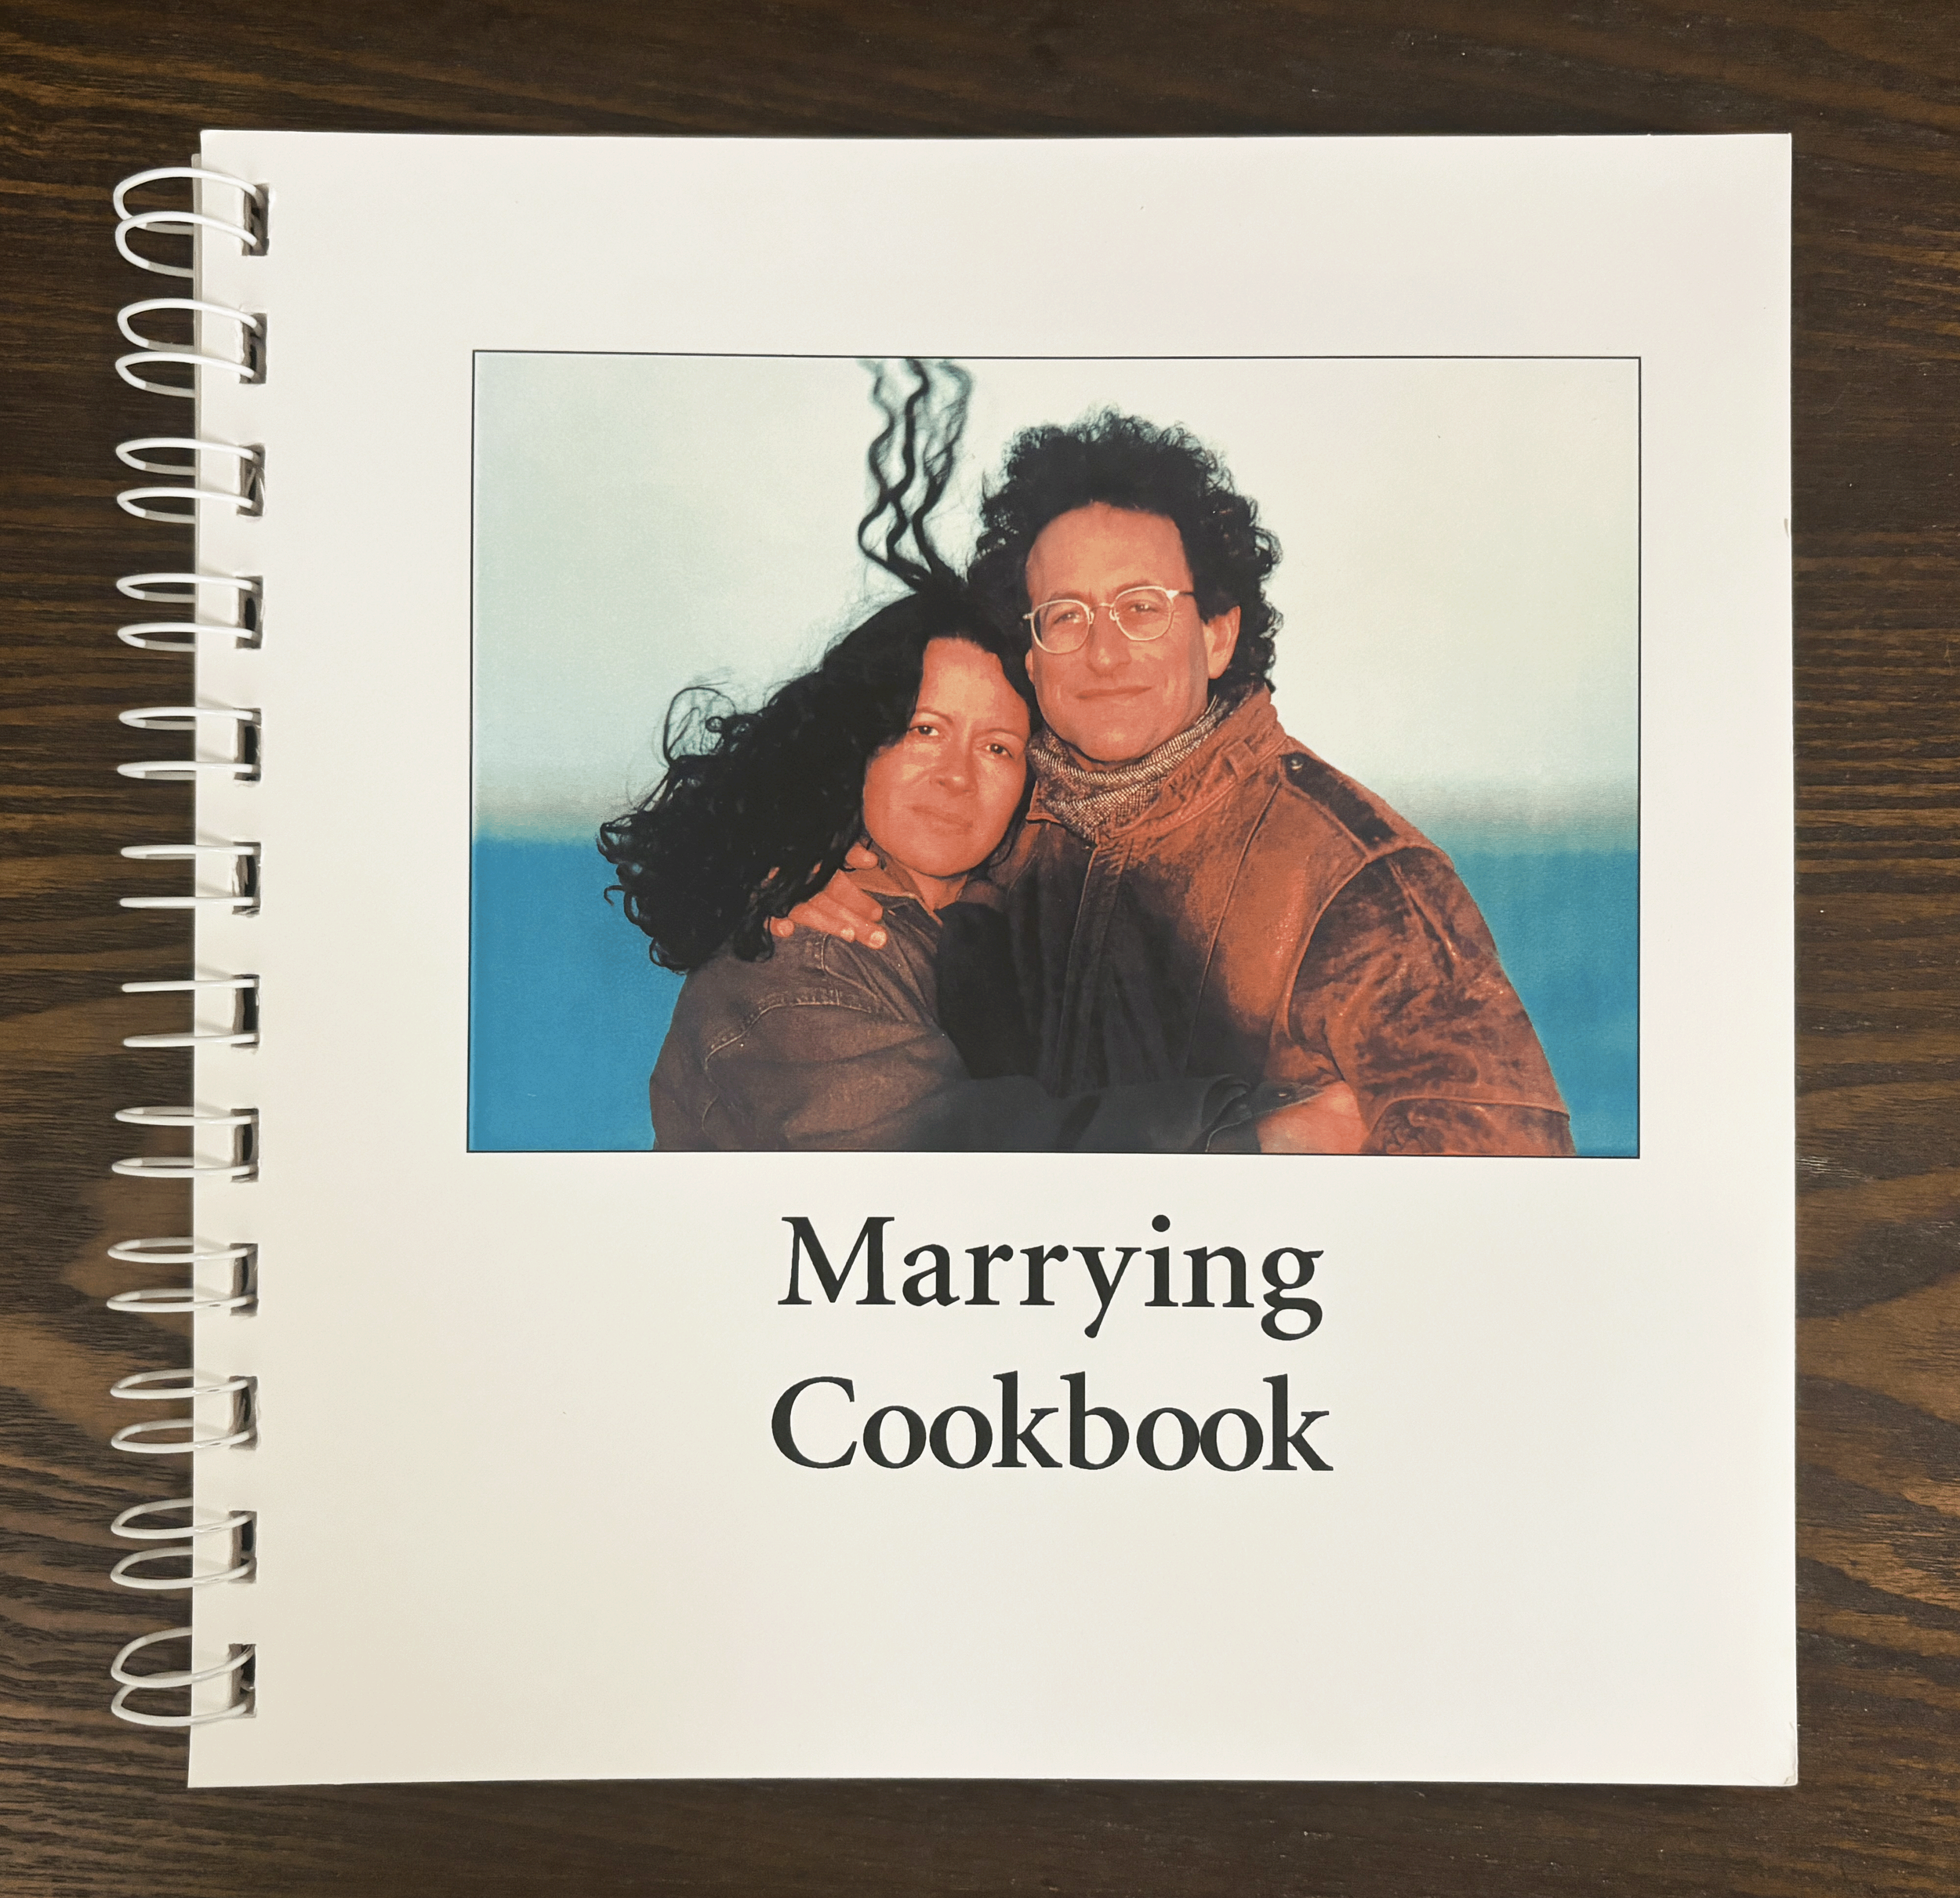 Marrying Cookbook by Reihana and Geoffrey Robinson 1999 (front).png